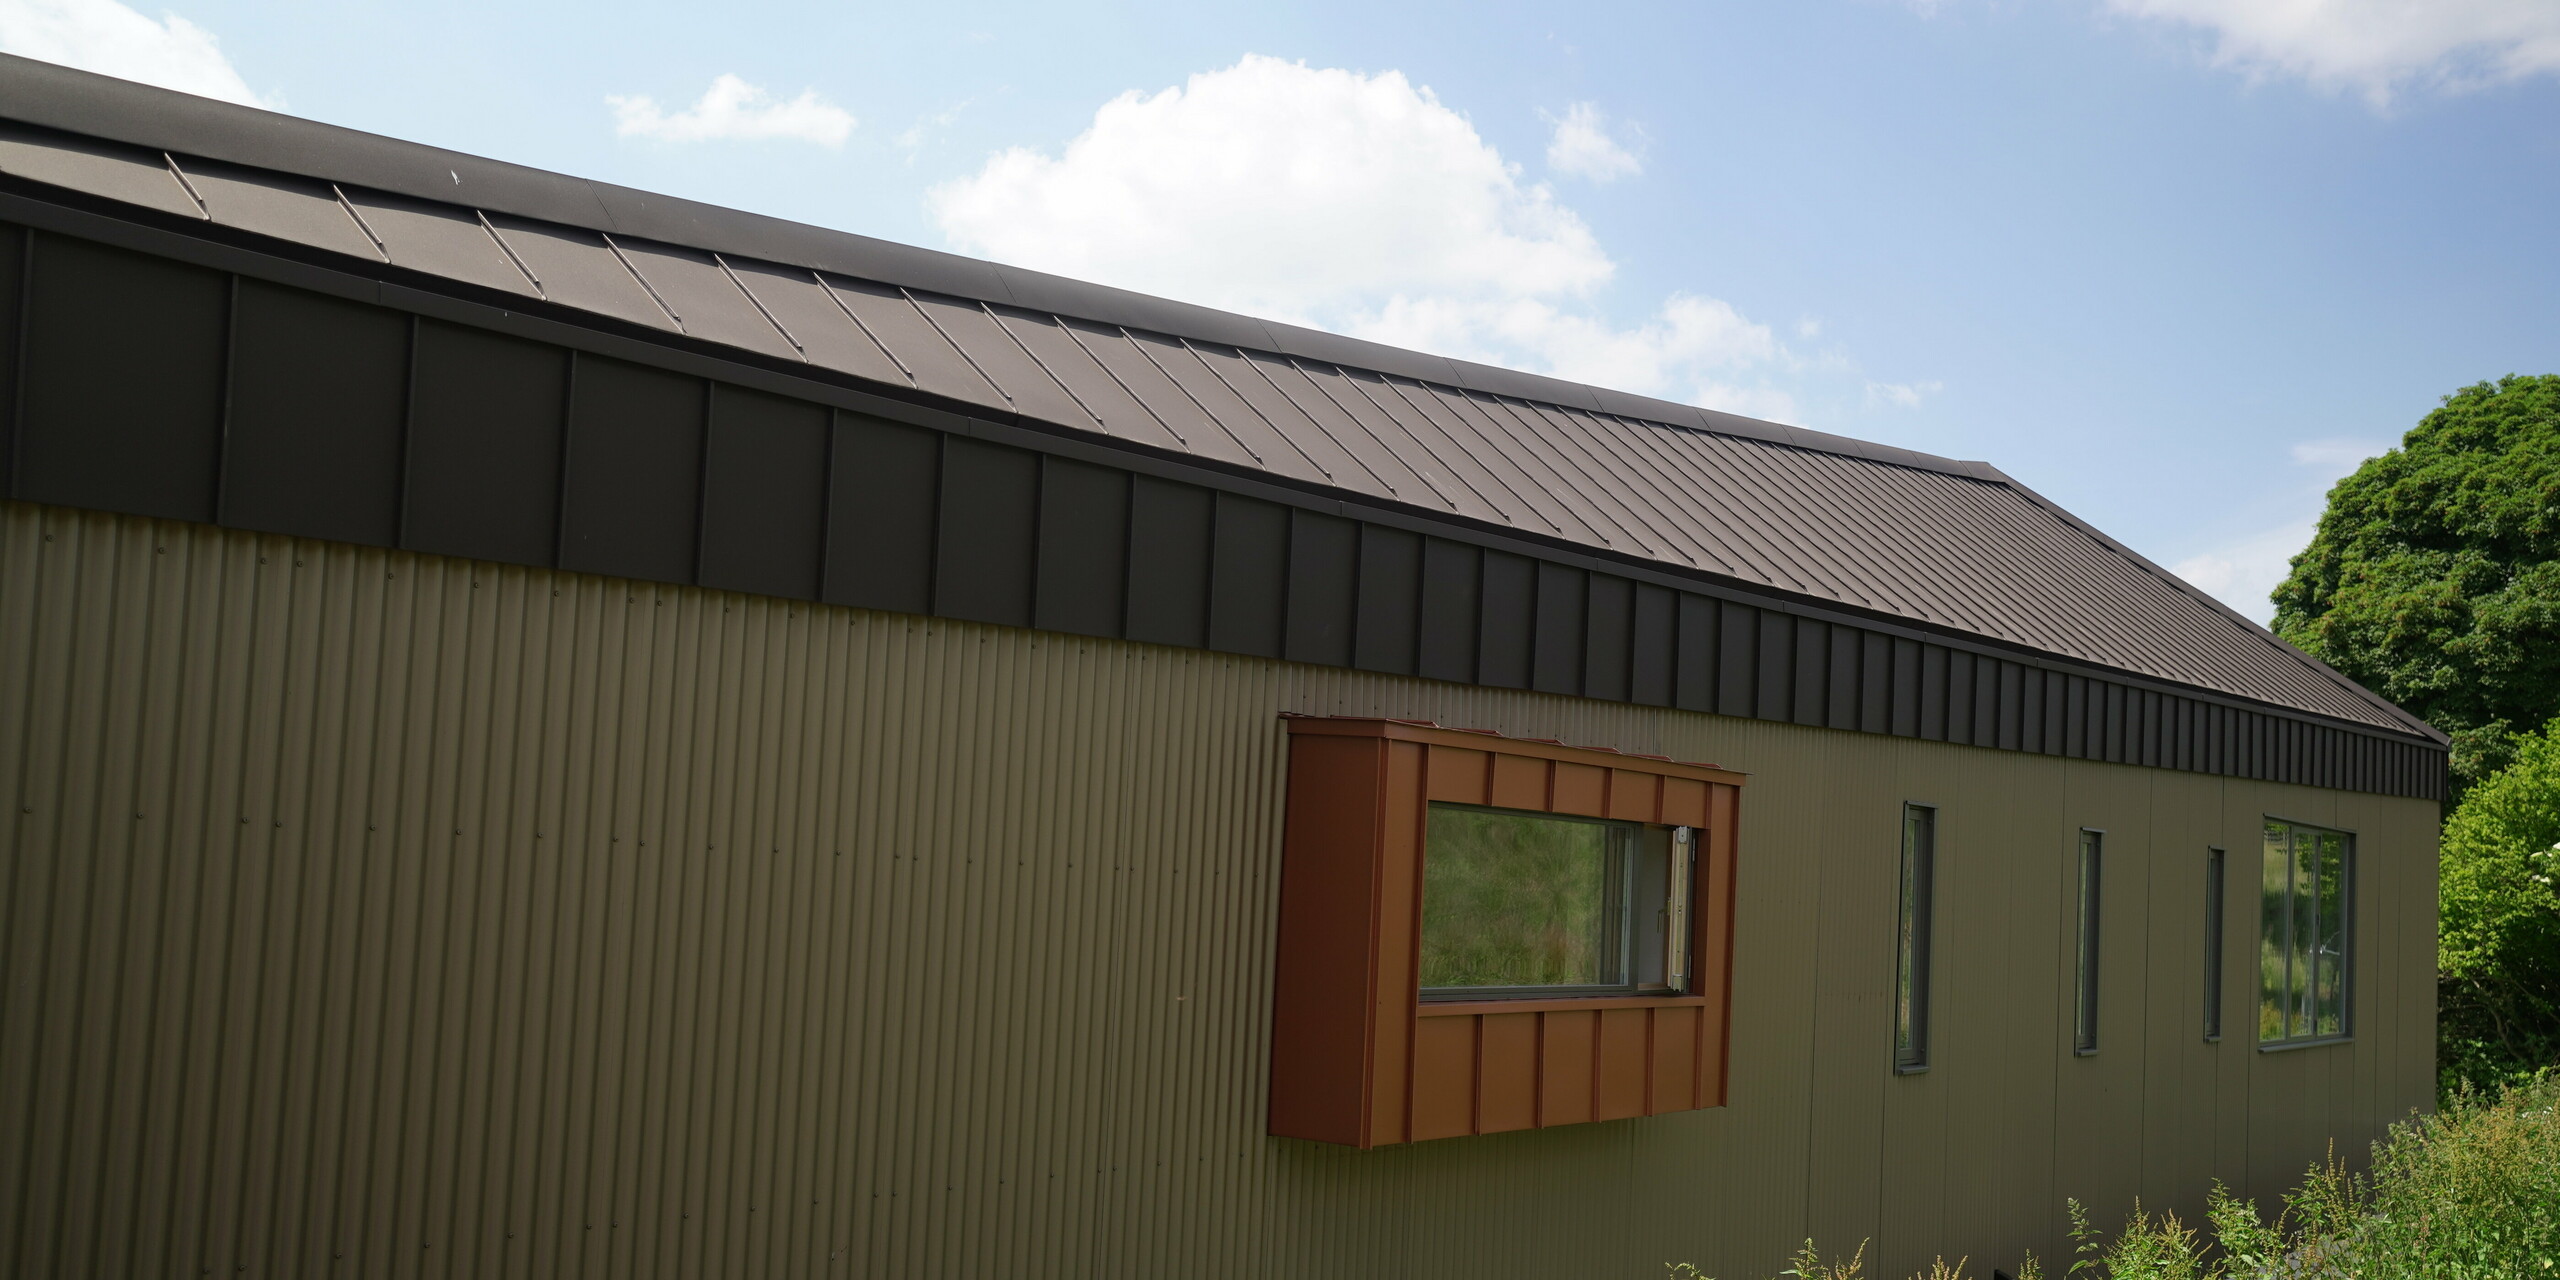 Longhouse with aluminium roof made of PREFALZ in P.10 Brown and window cladding made of Falzonal in the colour New Copper